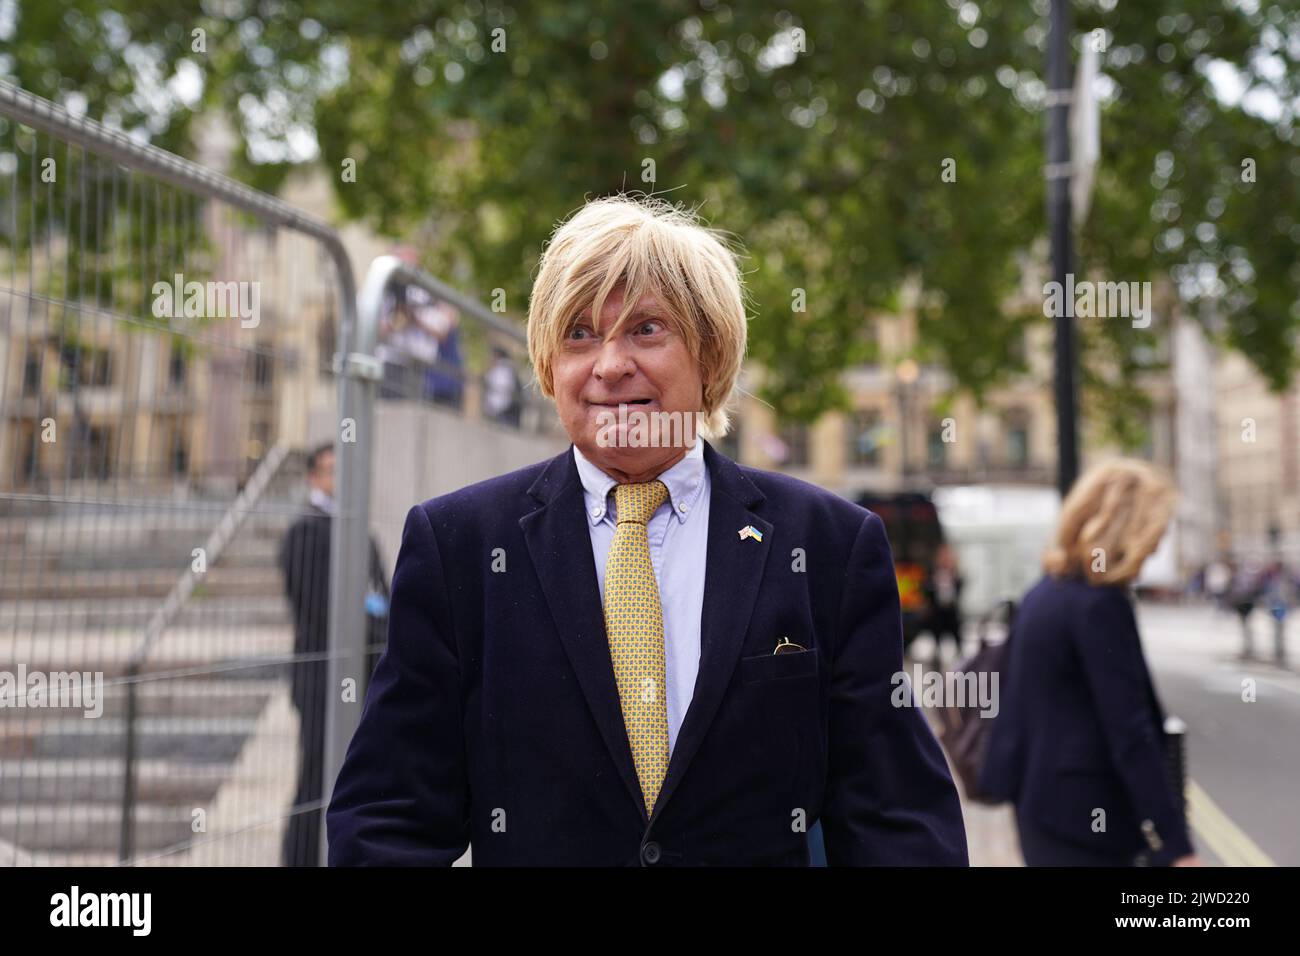 Michael Fabricant arrives at the Queen Elizabeth II Centre in London for the announcement of the new Conservative party leader, who will become the next Prime Minister. Picture date: Monday September 5, 2022. Stock Photo